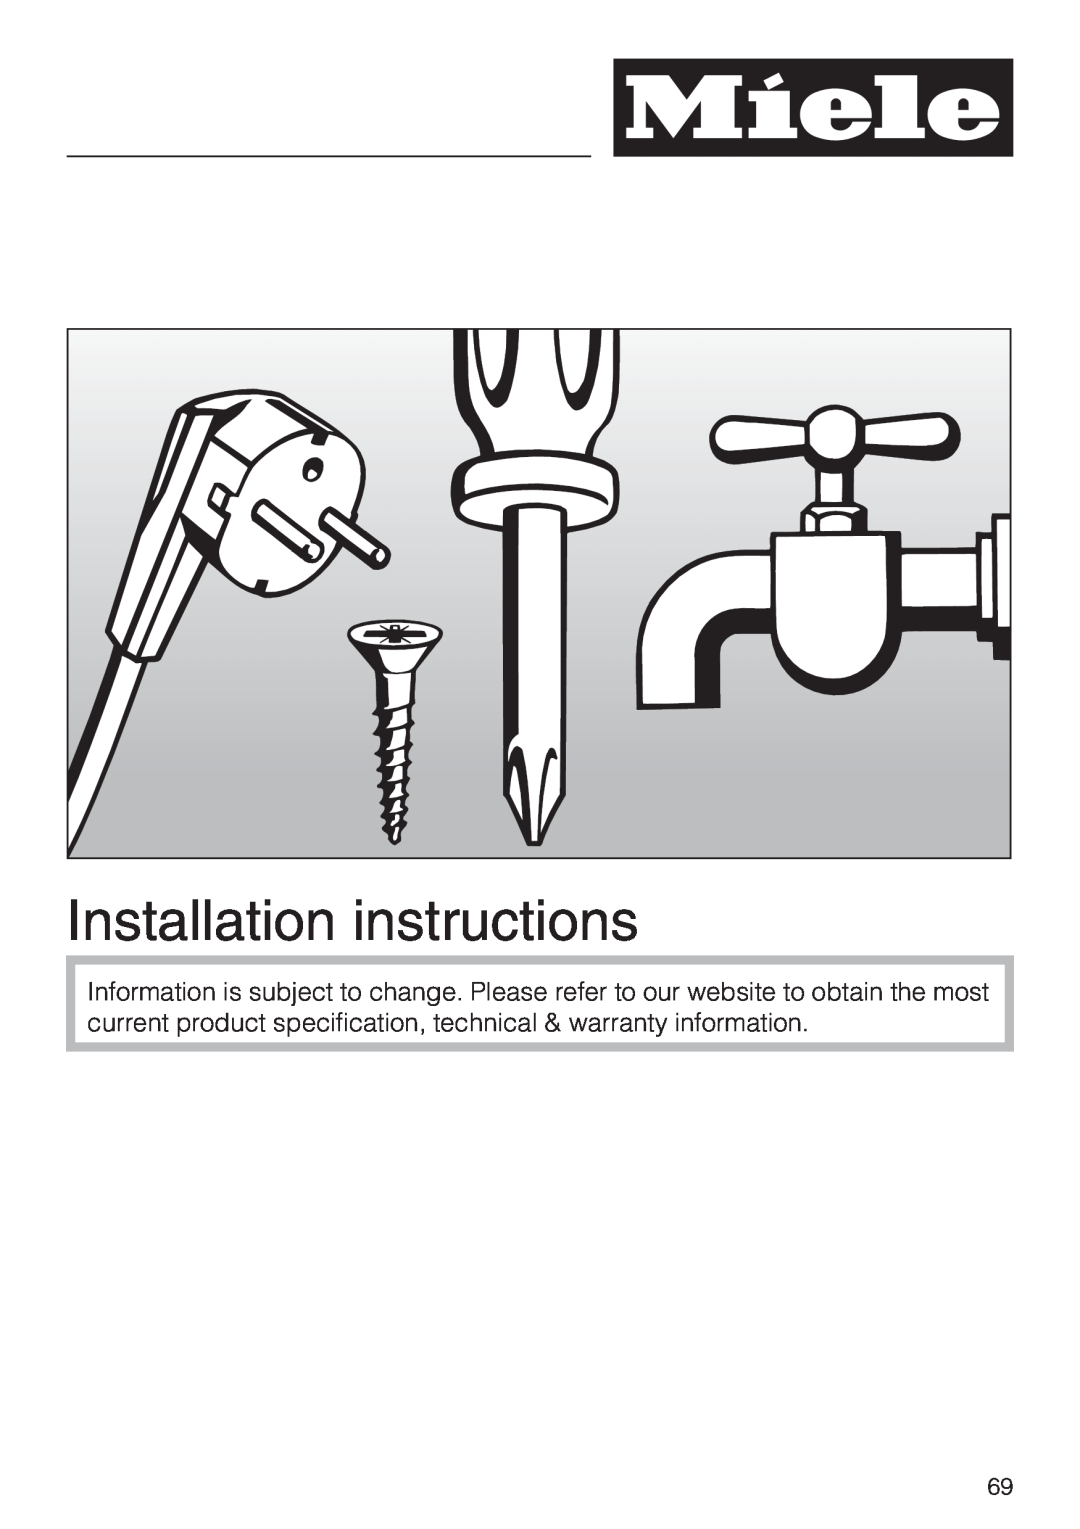 Miele 7995311, CM 5100 manual Installation instructions 